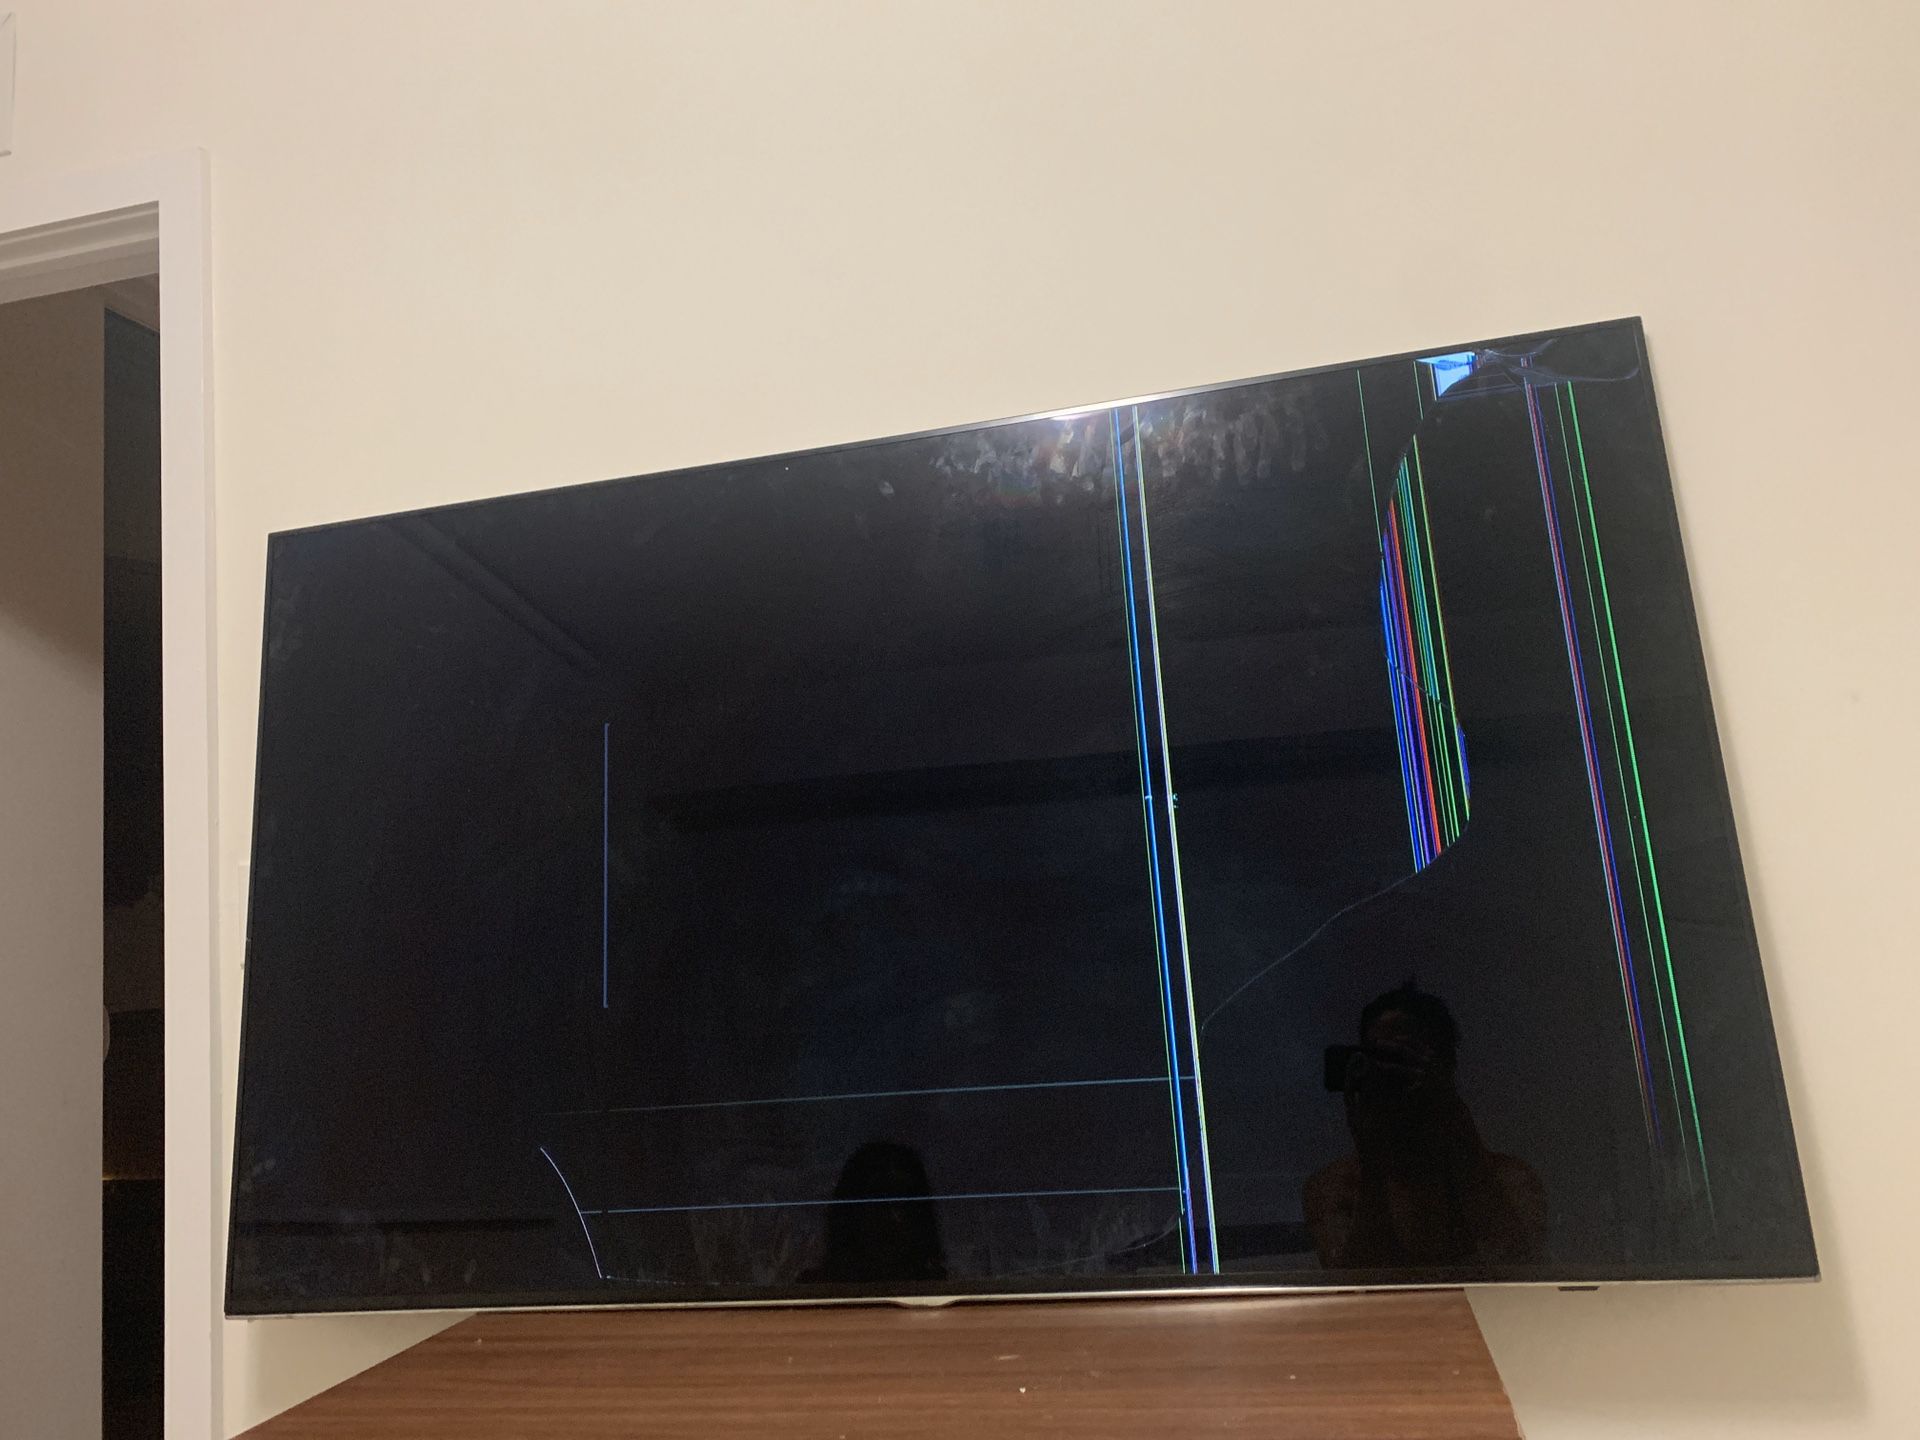 Samsung 60 inch smart tv broken can be used for parts